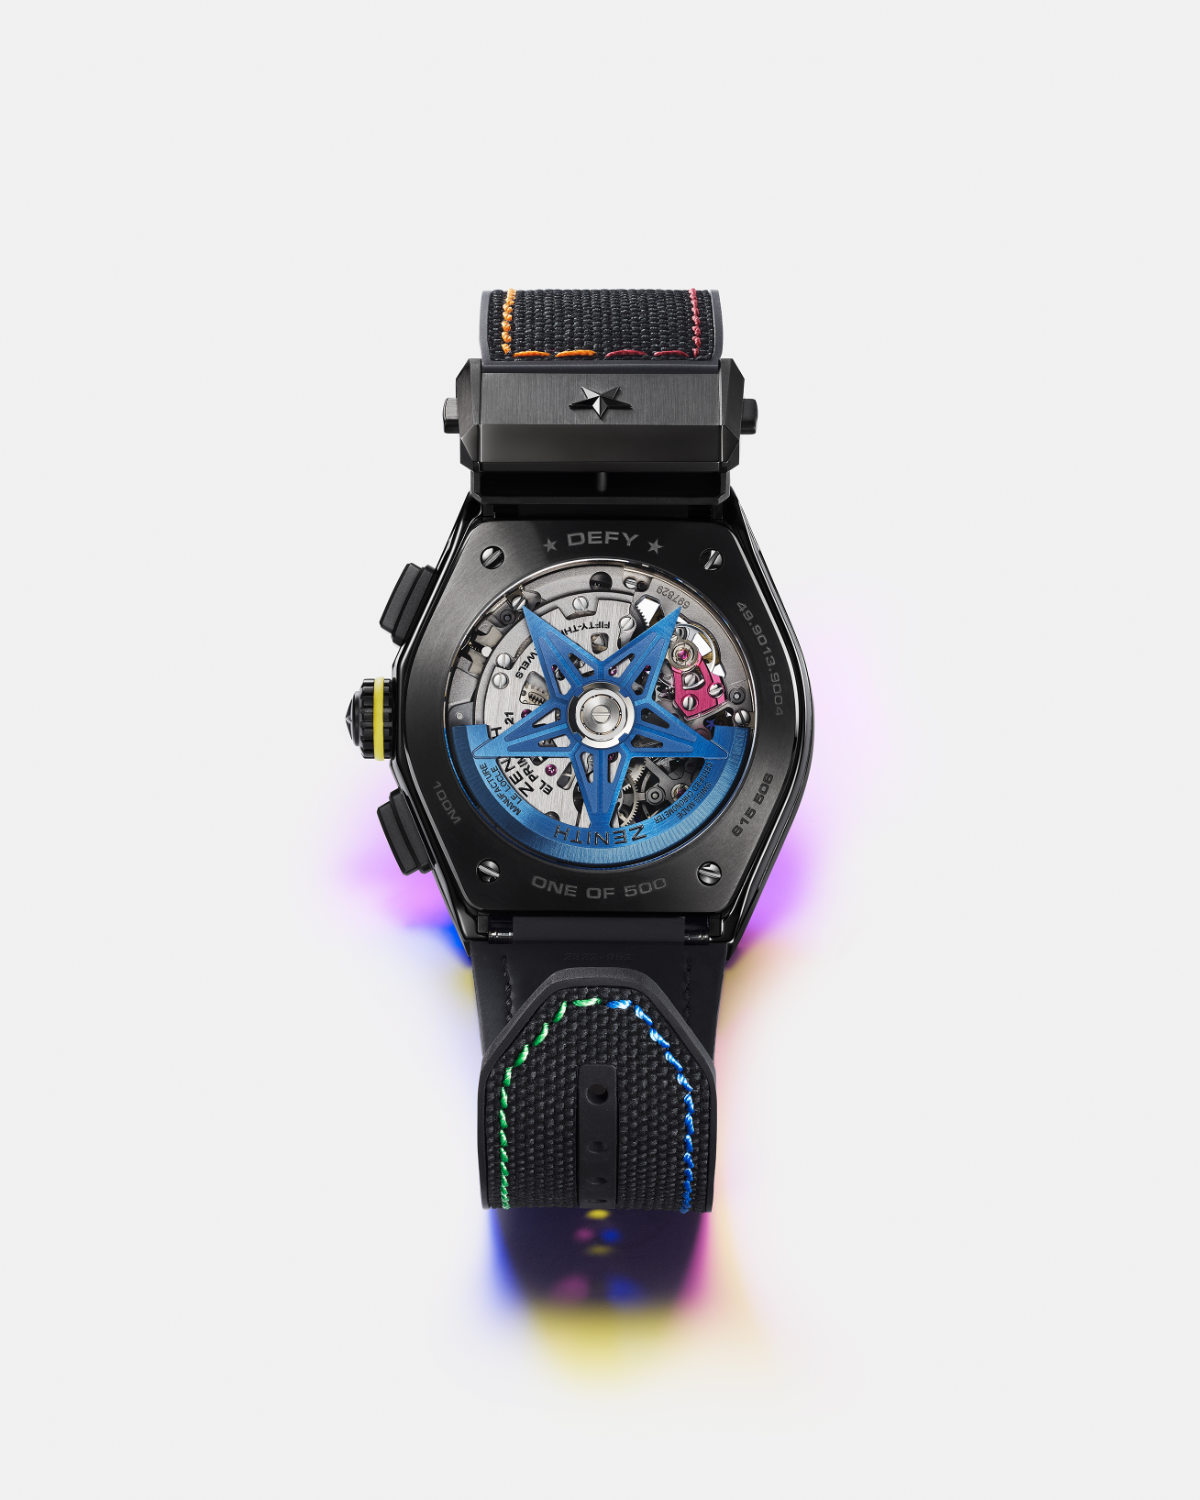 Zenith’s High-frequency Precision Returns In The Defy 21 Chroma II